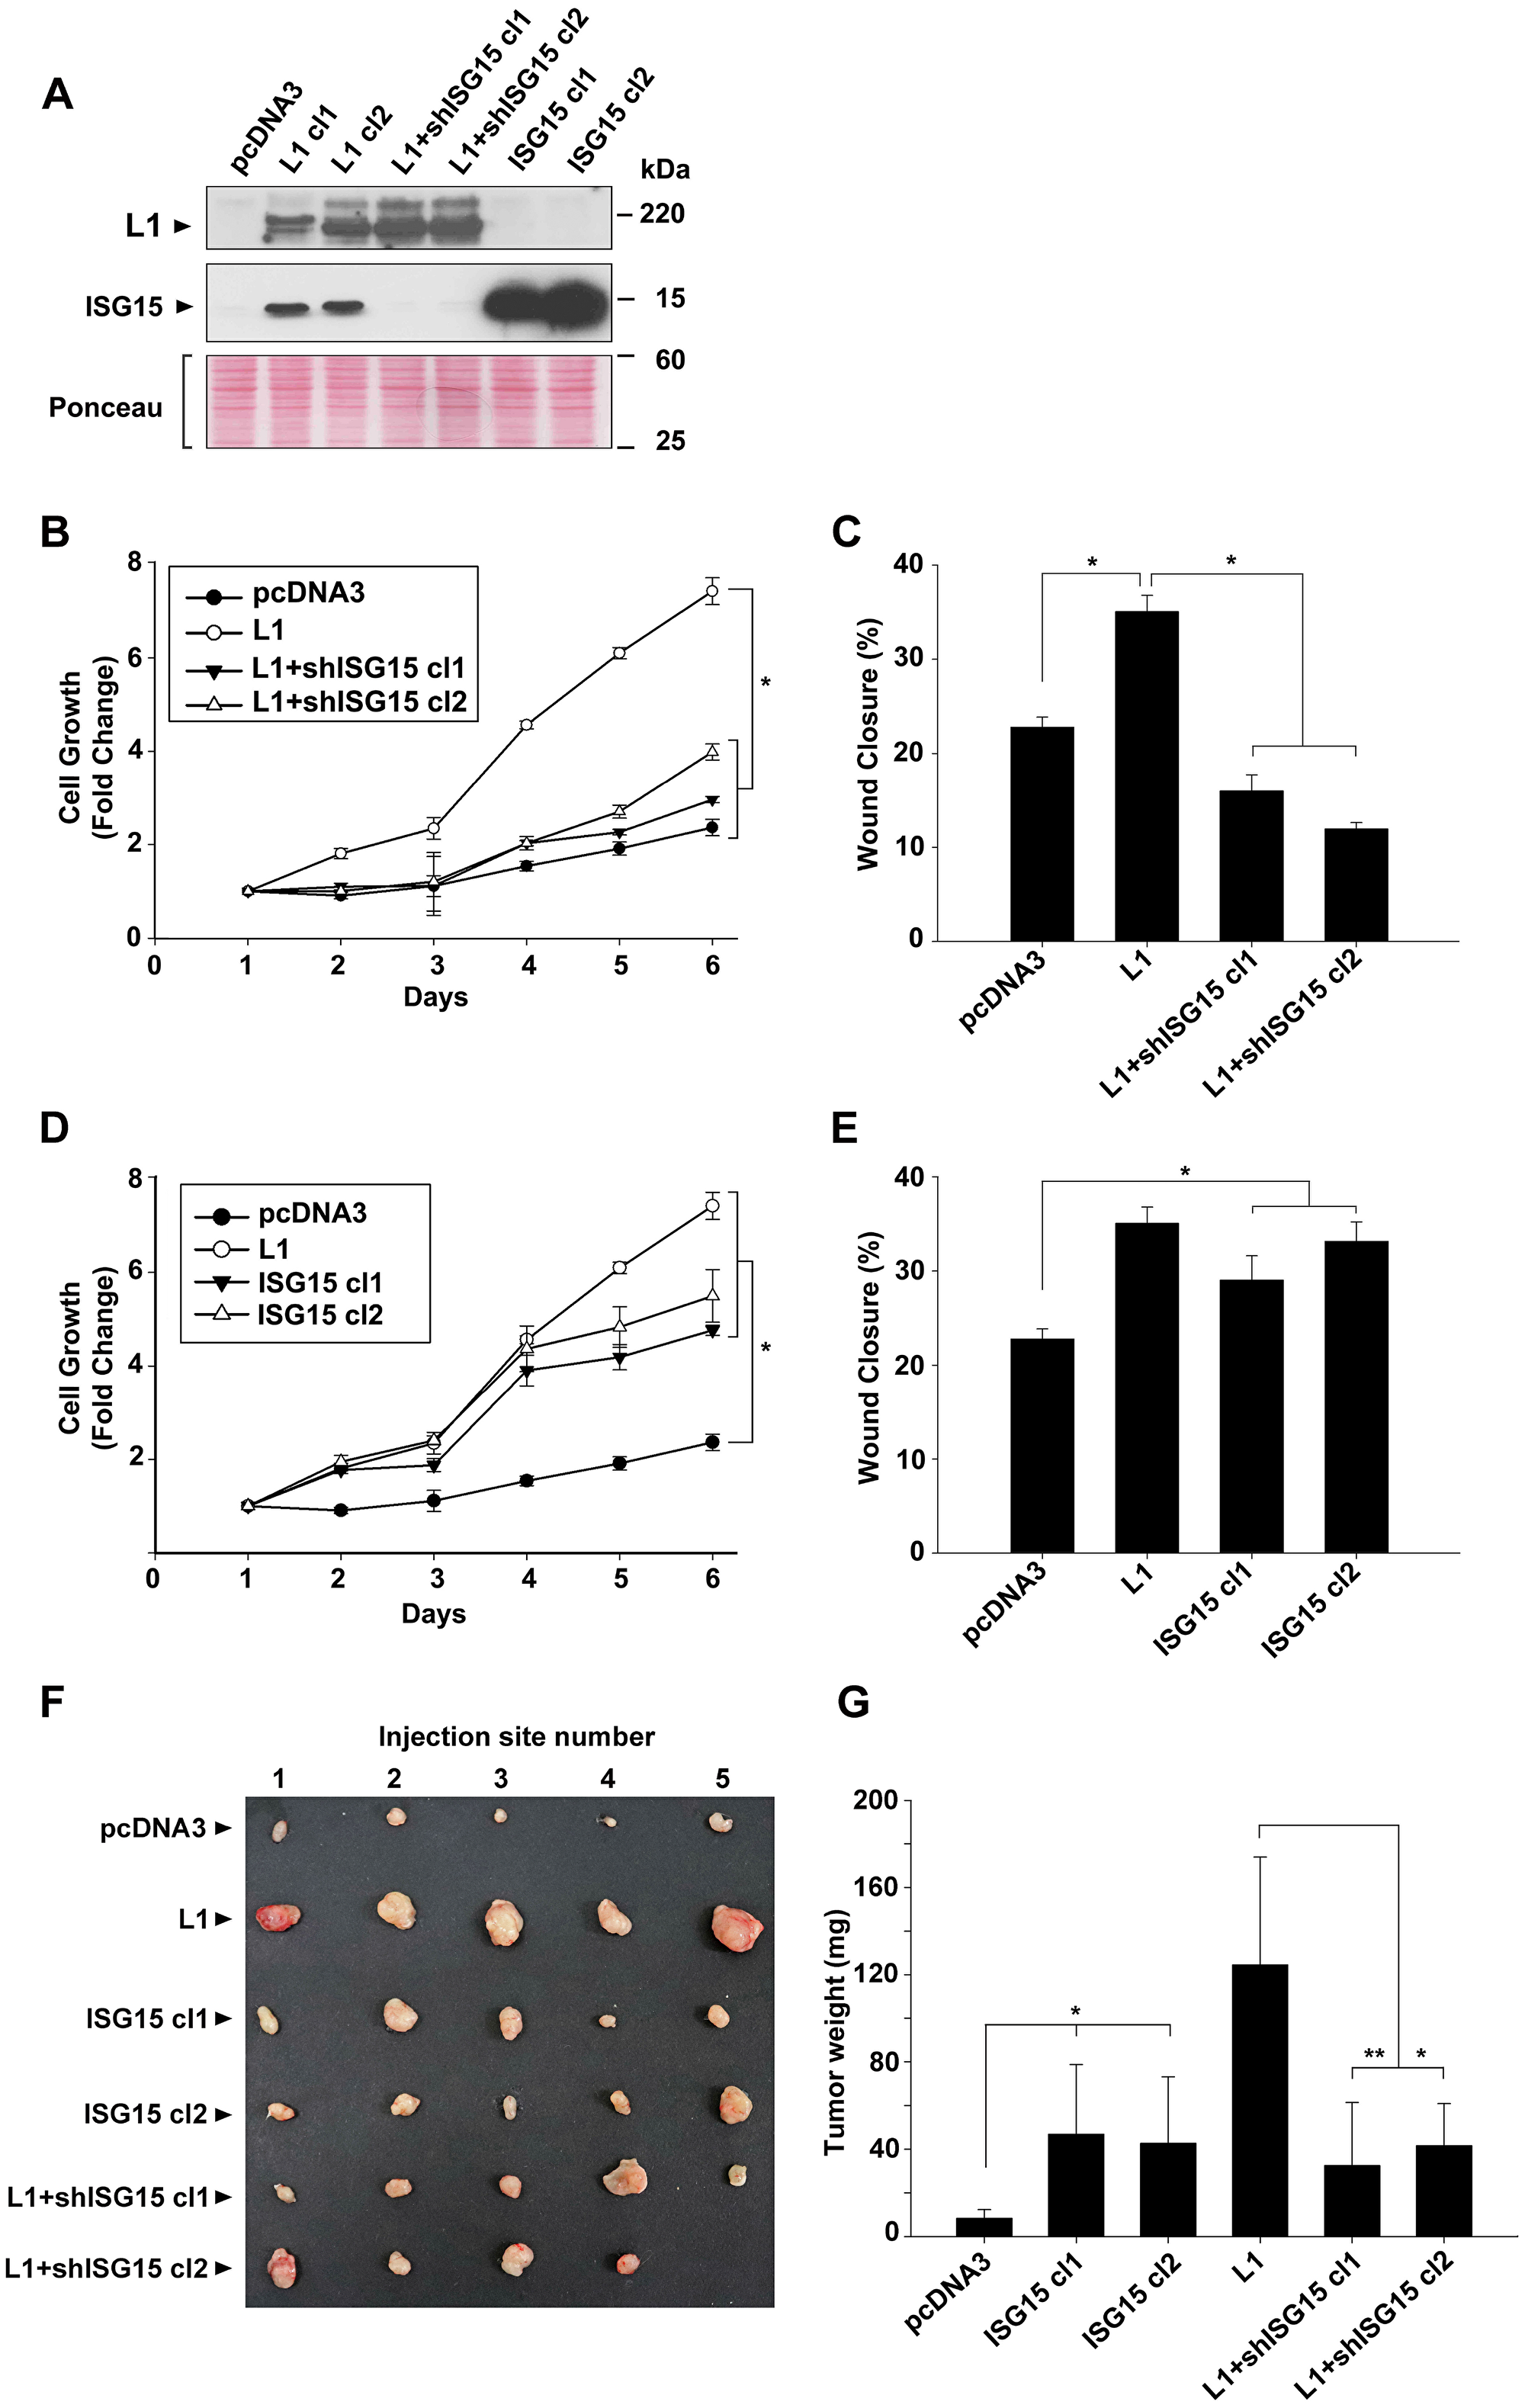 Modulation of ISG15 expression in CRC cells affects cell proliferation, motility and tumorigenesis in human CRC cells.